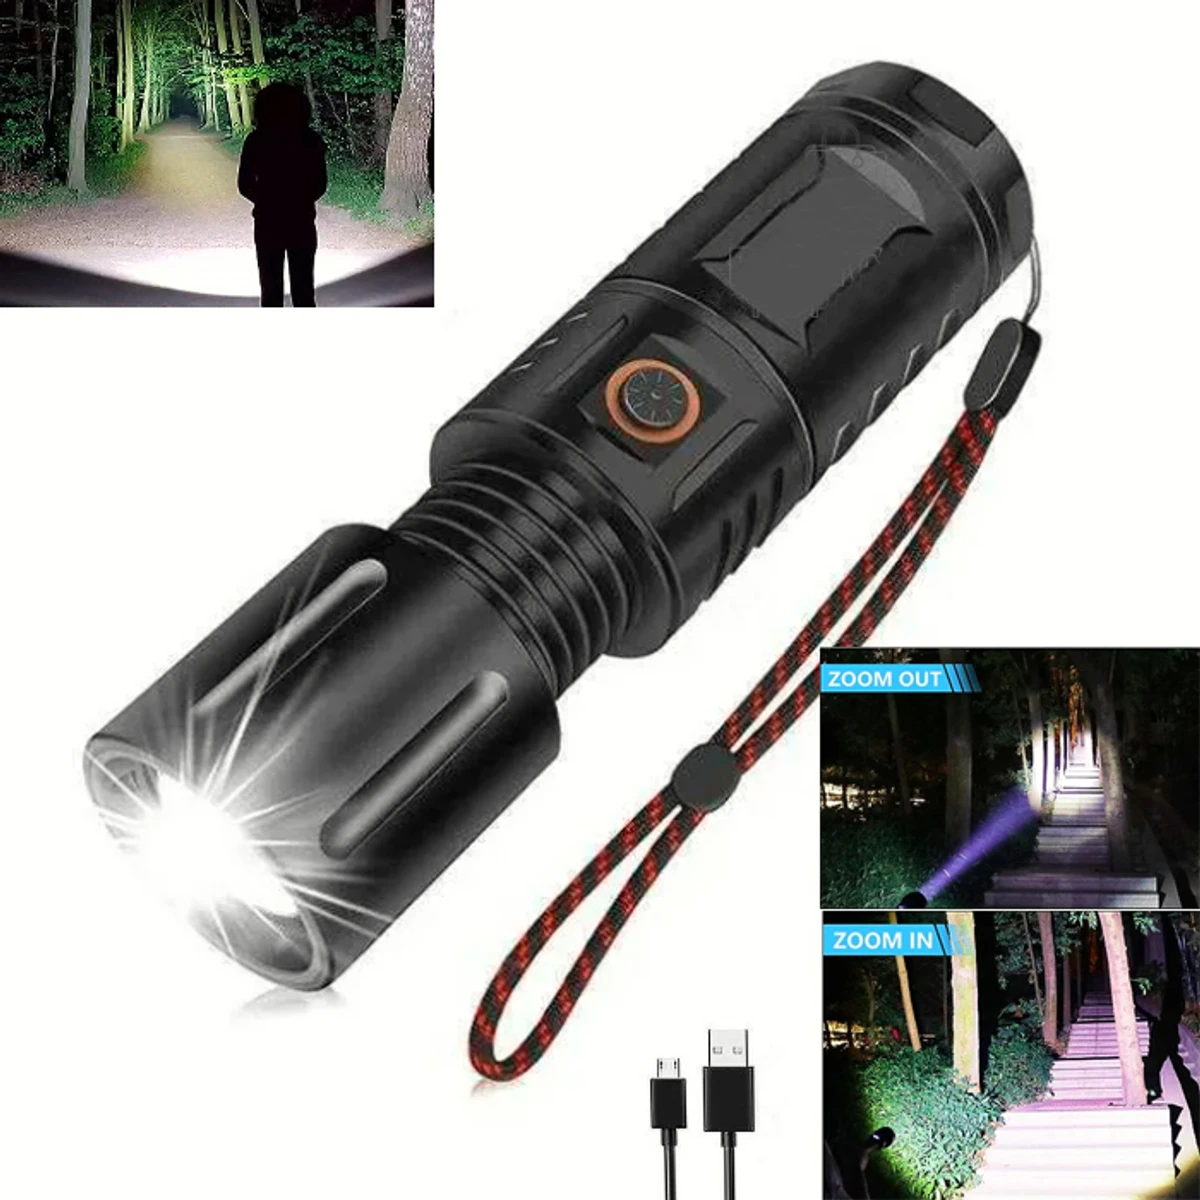 RECHARGEABLE LED TORCH LIGHT, WATERPROOF STRONG LED FLASHLIGHT WITH POWER BANK